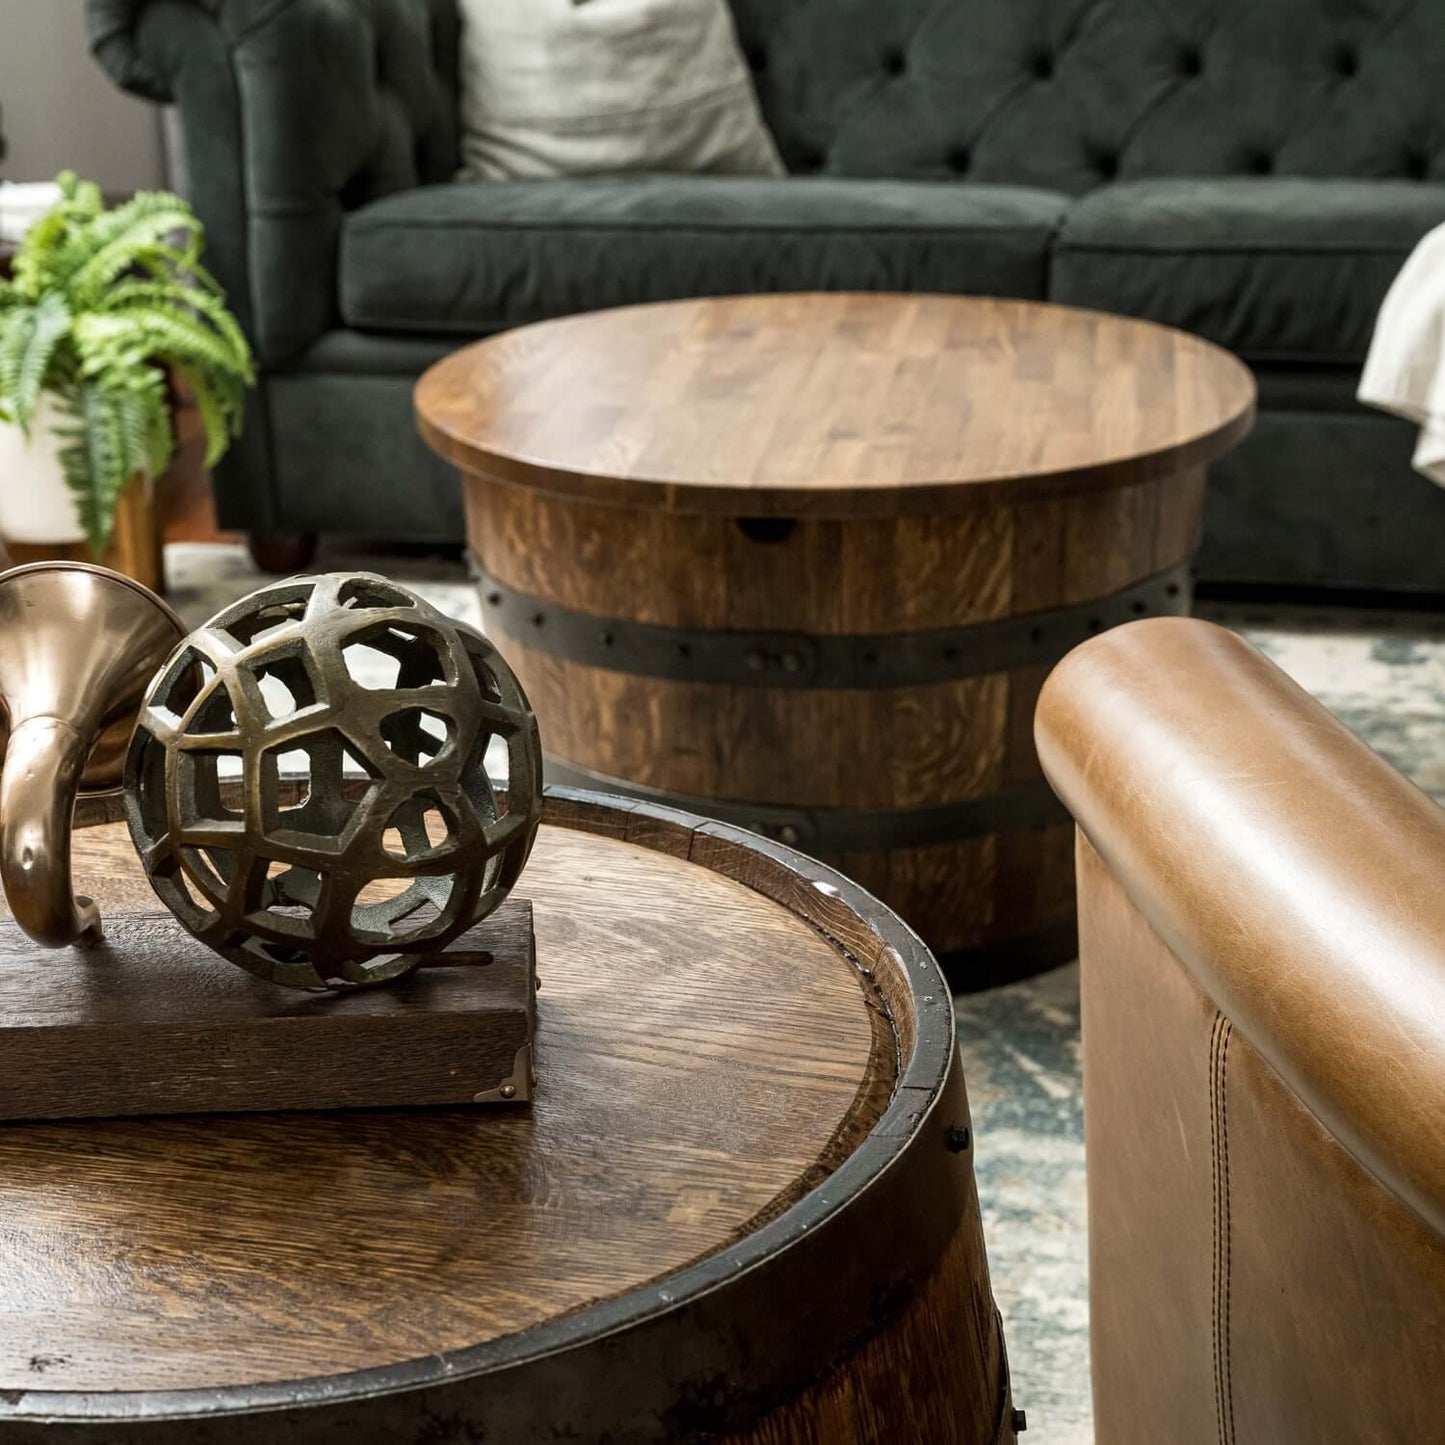 Round Half-Barrel Coffee Table or End Table